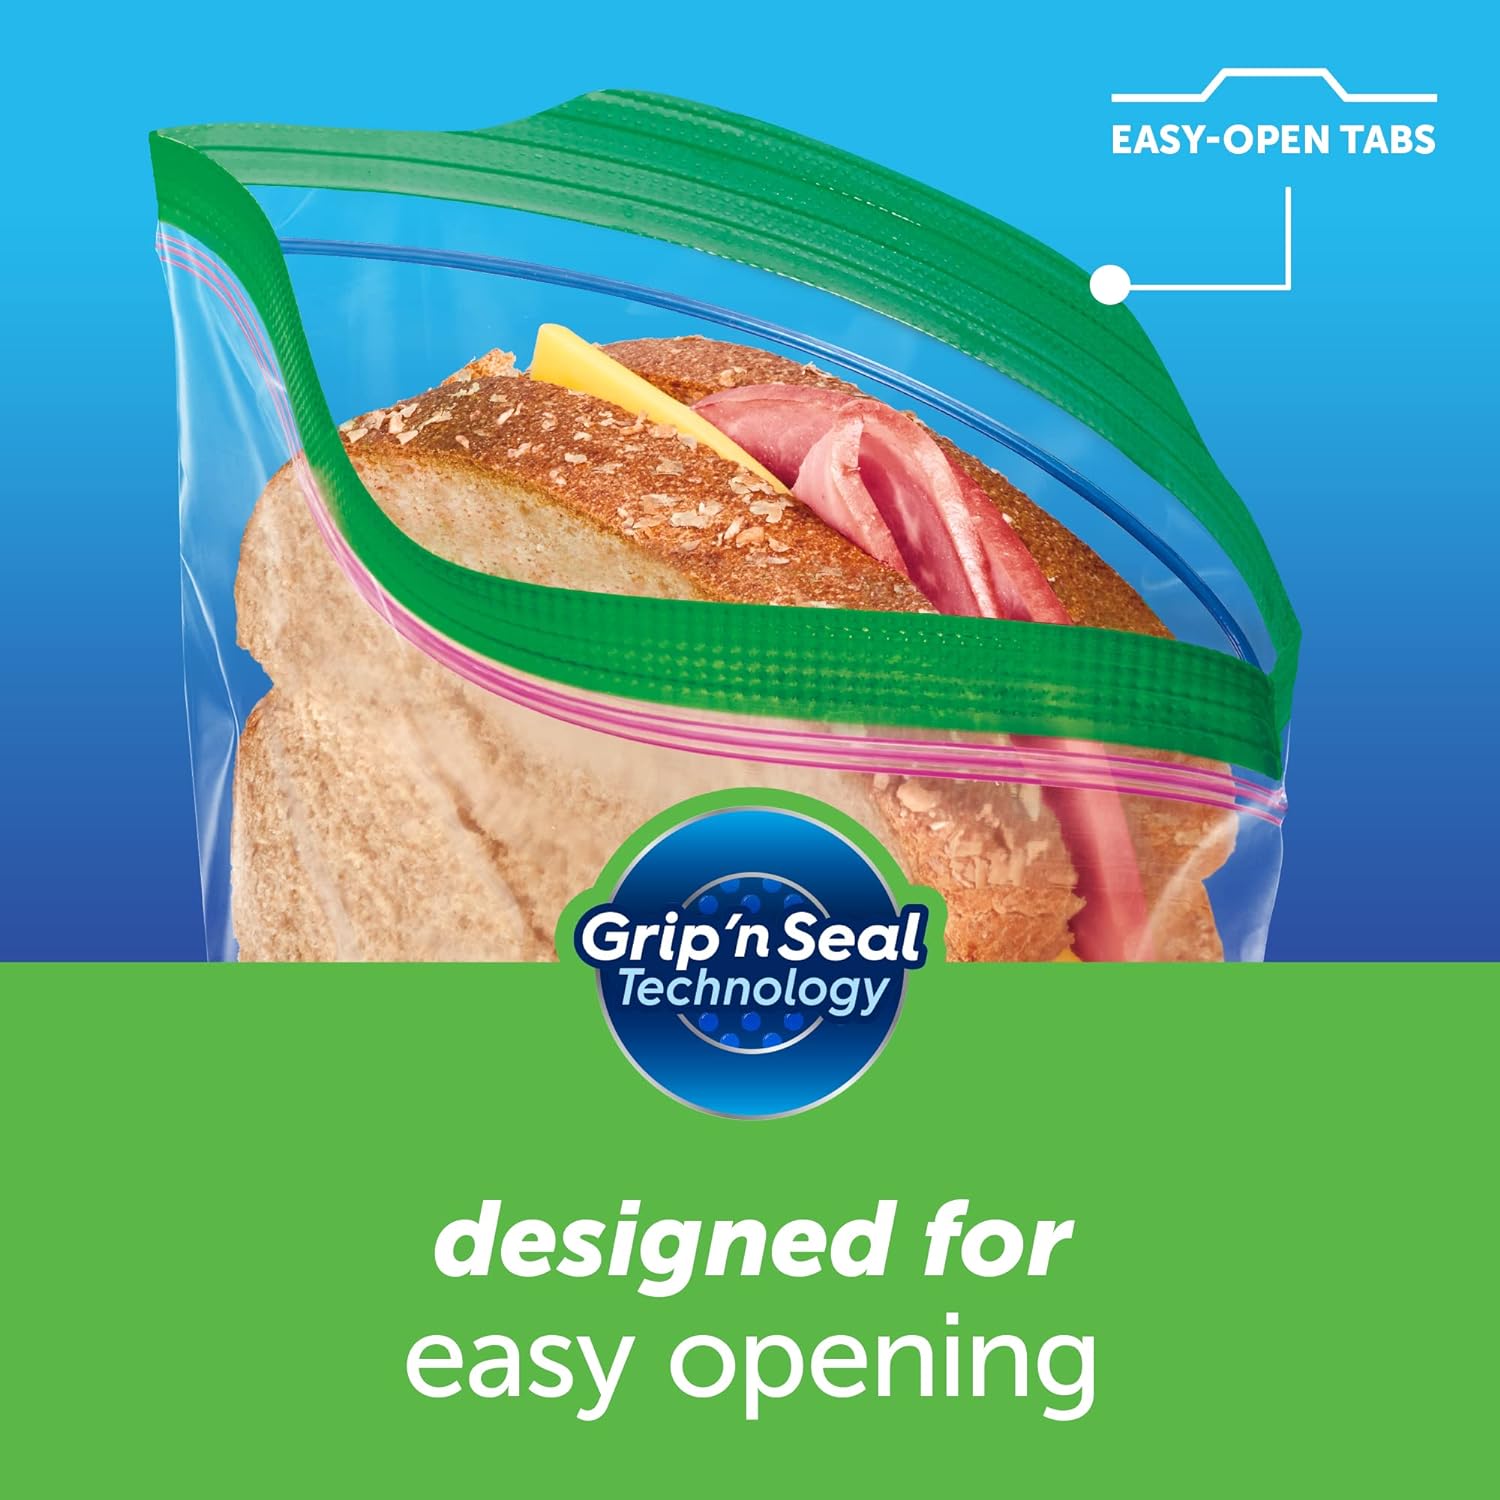 Ziploc Sandwich and Snack Bags, Storage Bags for On the Go Freshness, Grip 'n Seal Technology for Easier Grip, Open, and Close, 280 Count